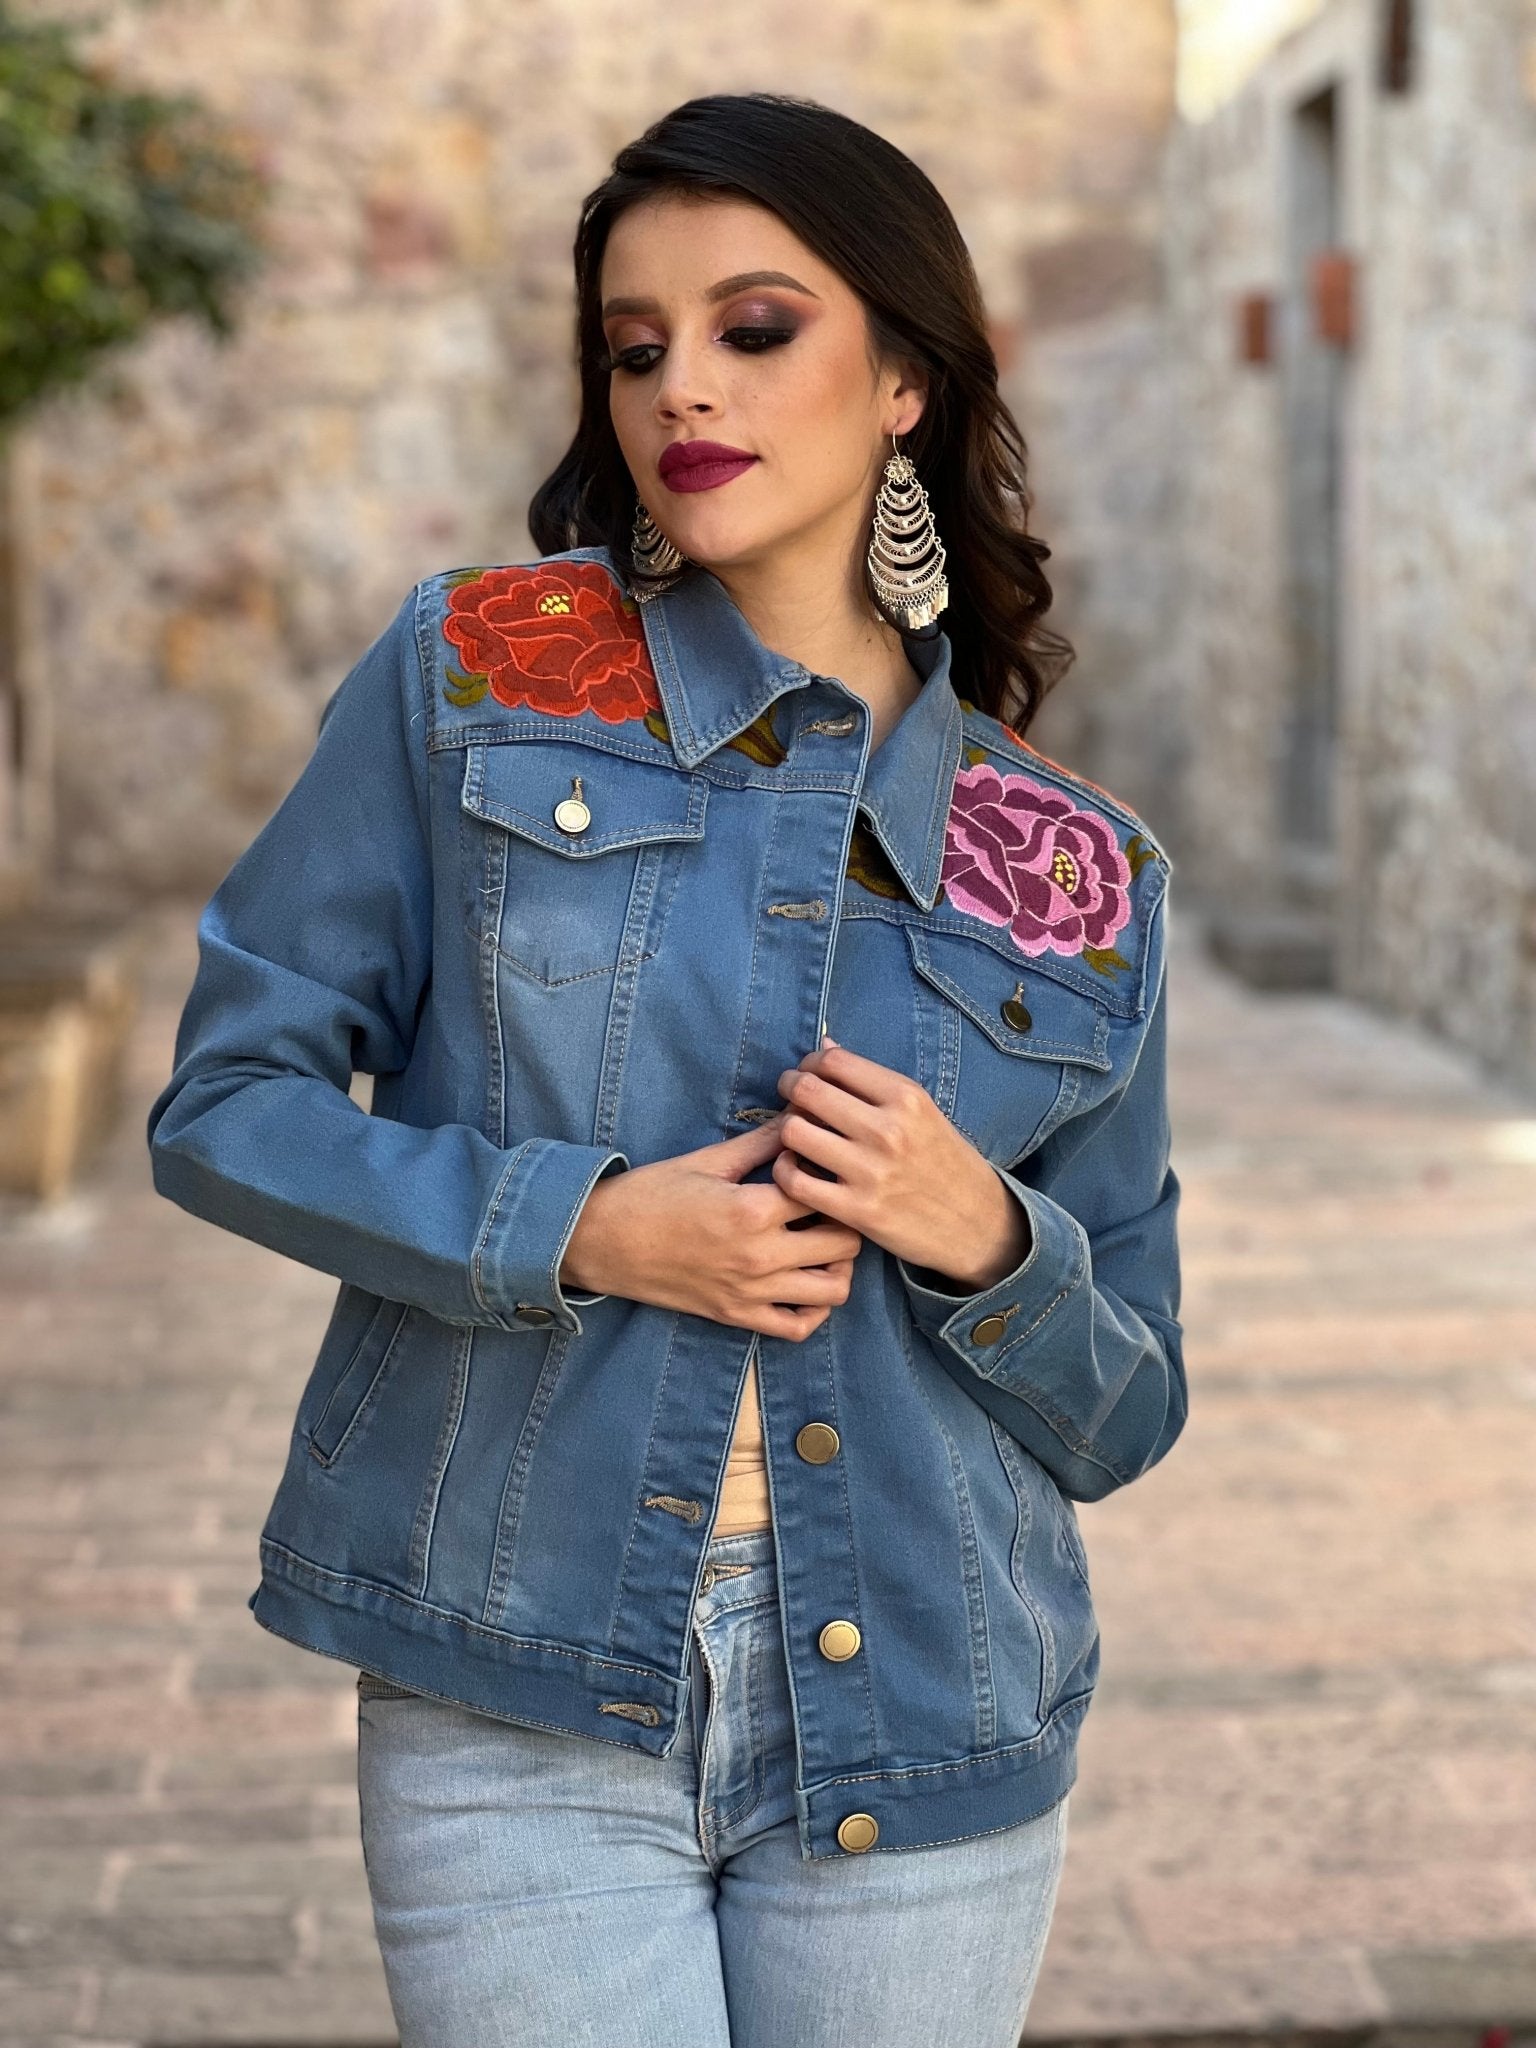 Mexican Embroidered Jeans Jacket. Zinacatan Jeans Jacket - Solei Store